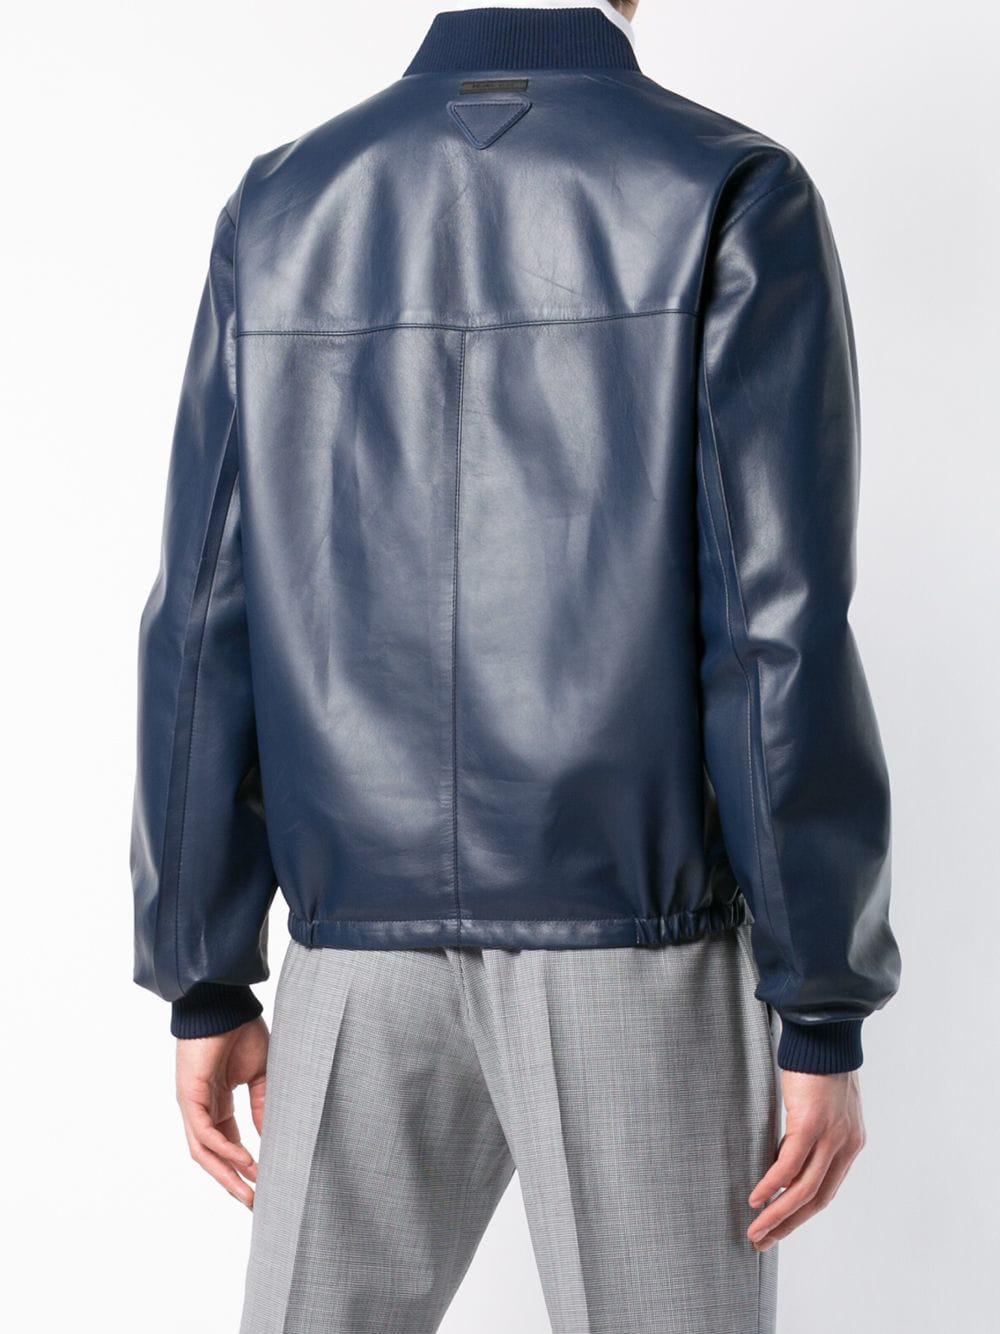 Prada Smooth Leather Bomber Jacket in Blue for Men | Lyst